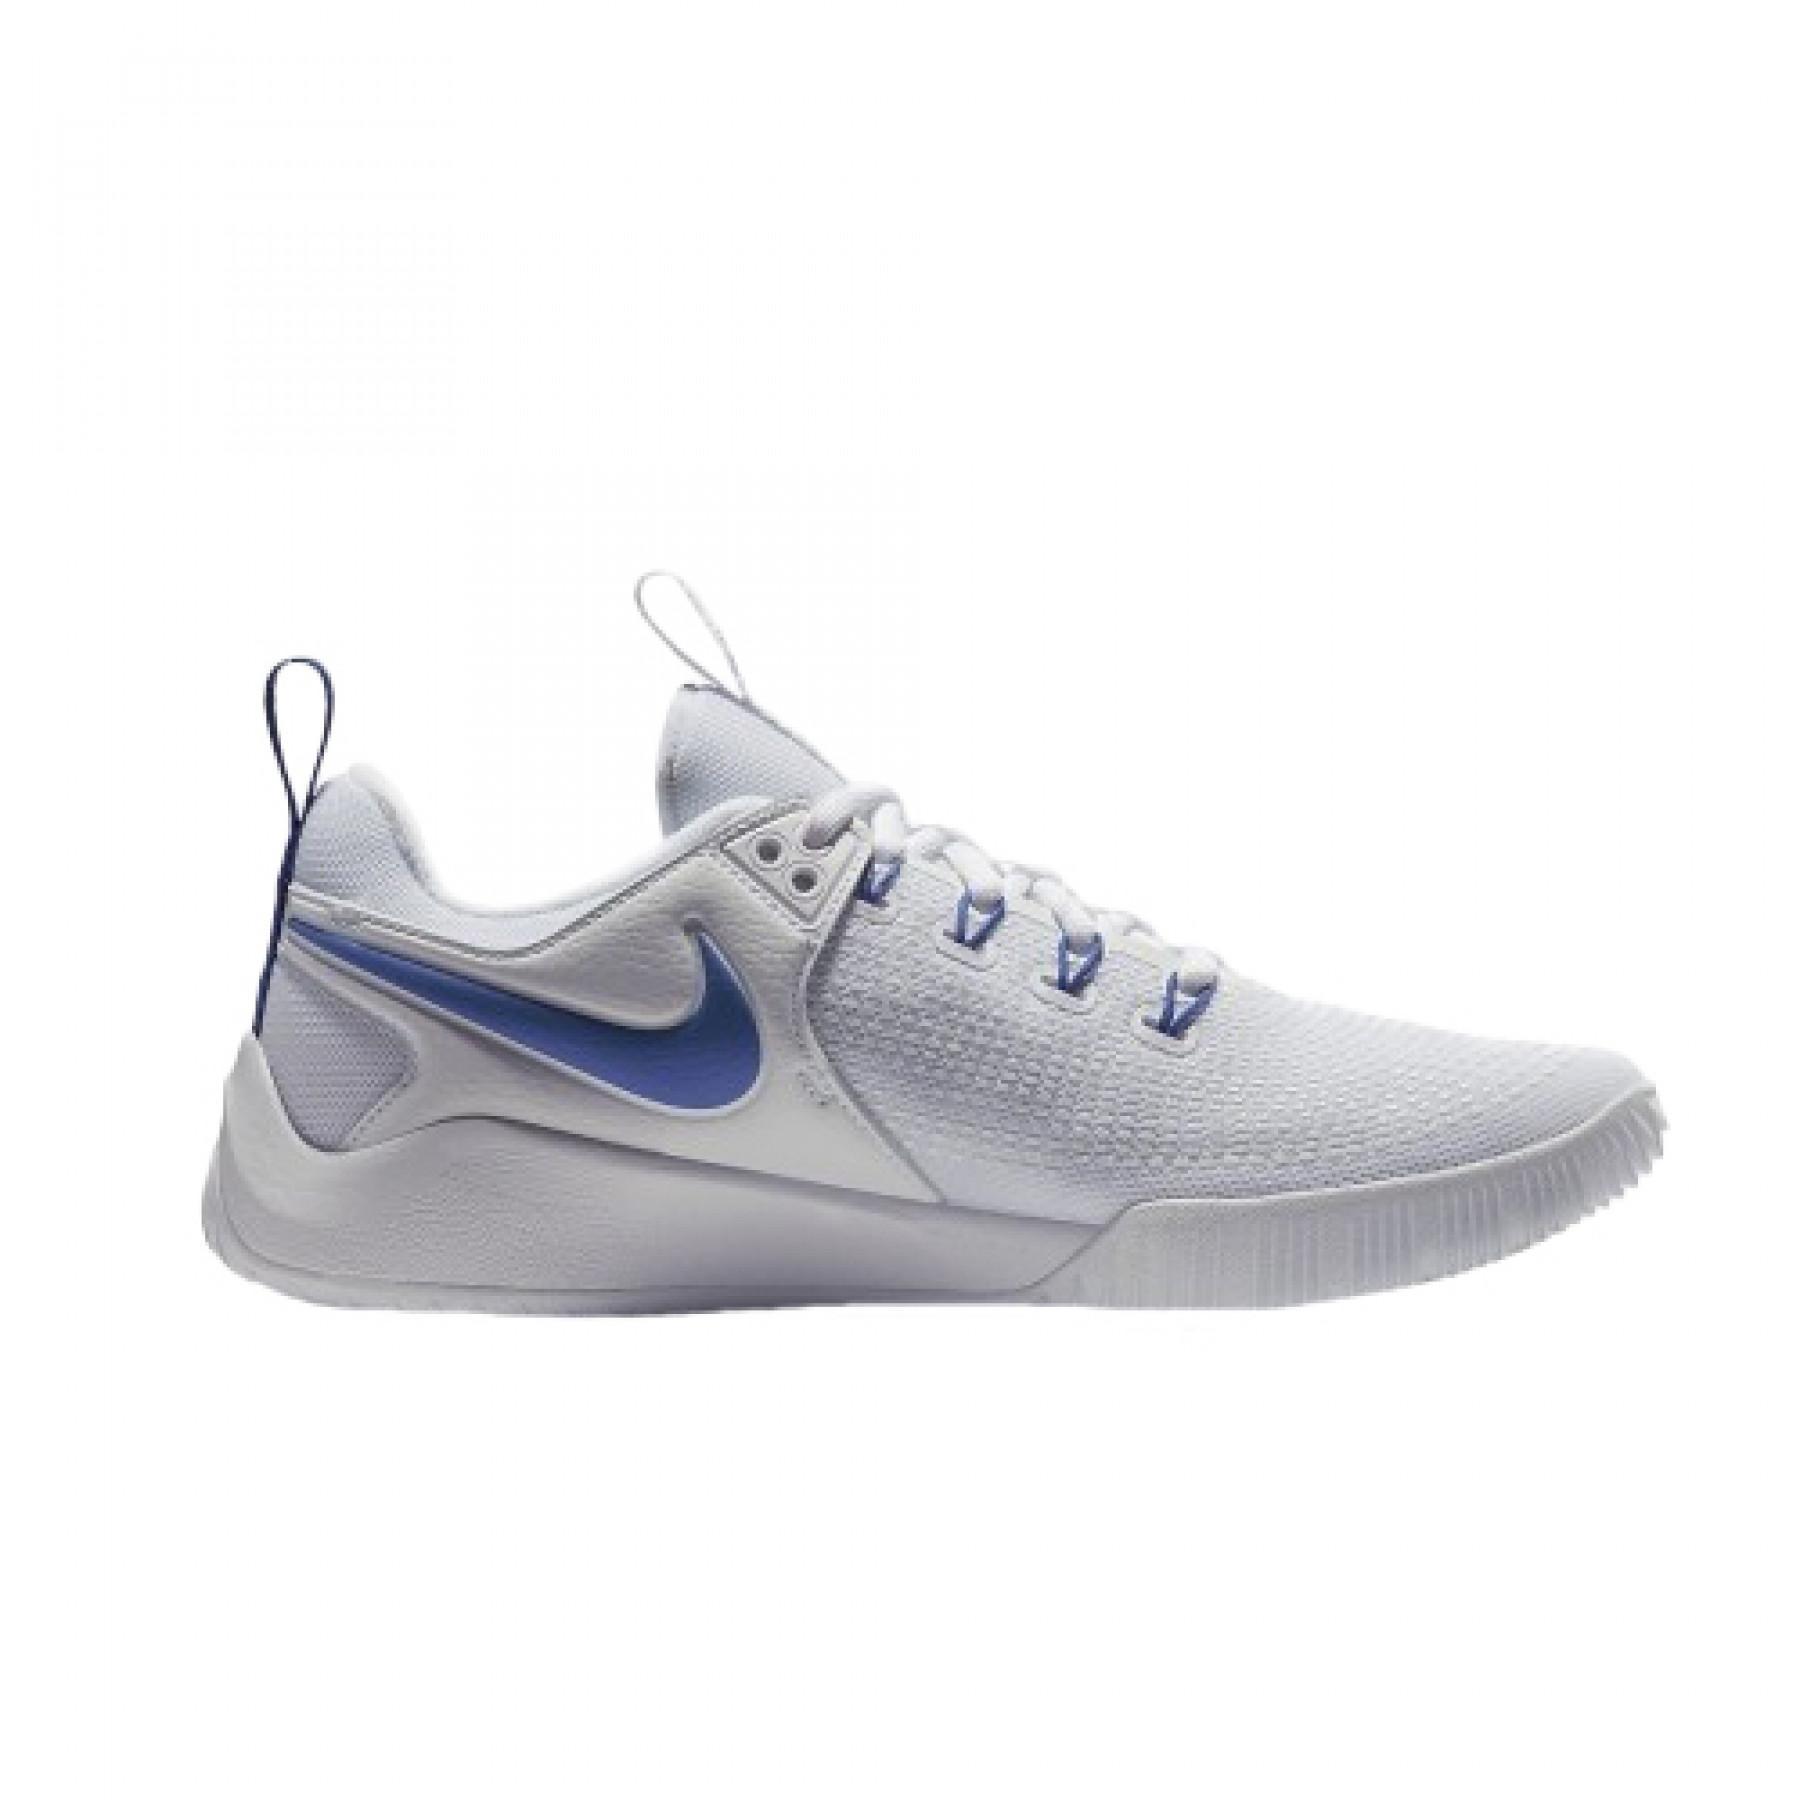 Shoes Nike Air Zoom Hyperace 2 - Nike - Other Brands - Shoes